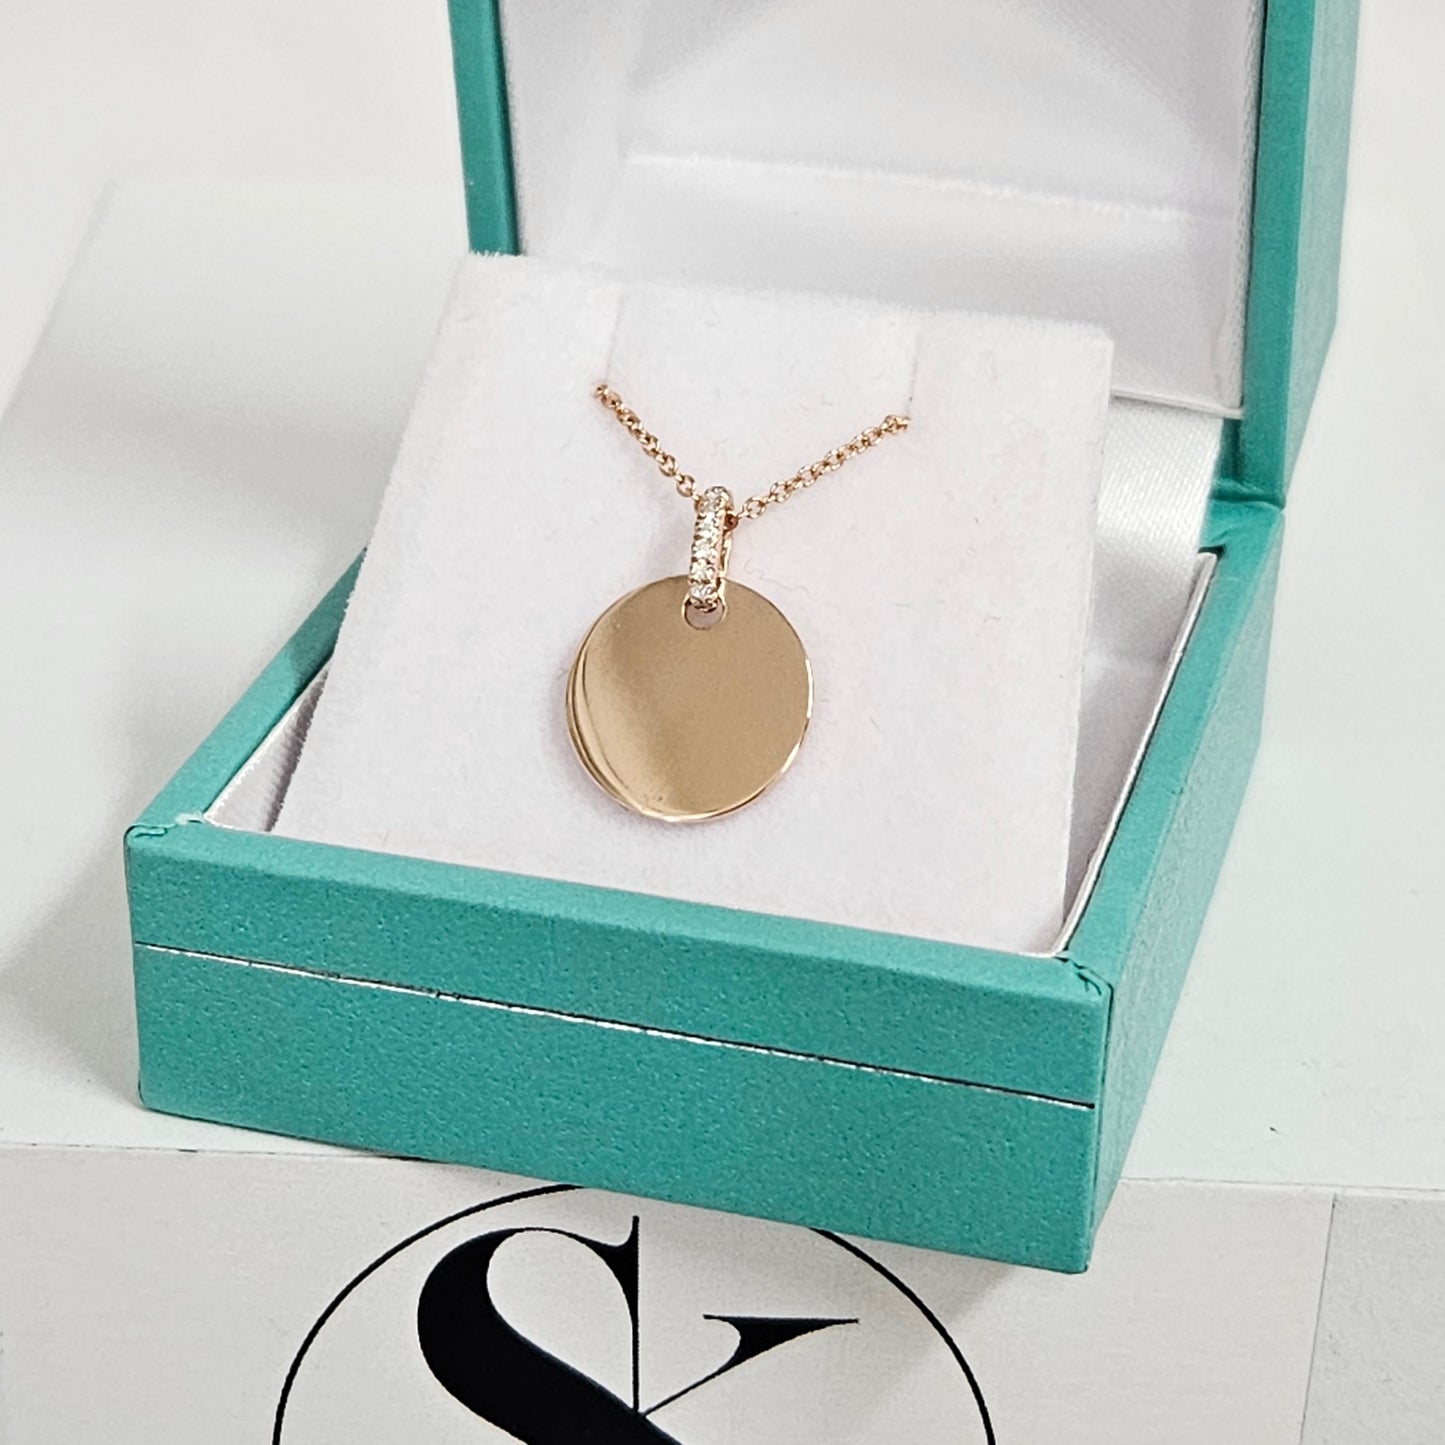 Round flat Disc Pendant/Diamond Pendant/Solid 14K Gold Necklace/Diamond Layering Necklace/Graduation Gift/Gift for Her/Anniversary Gift